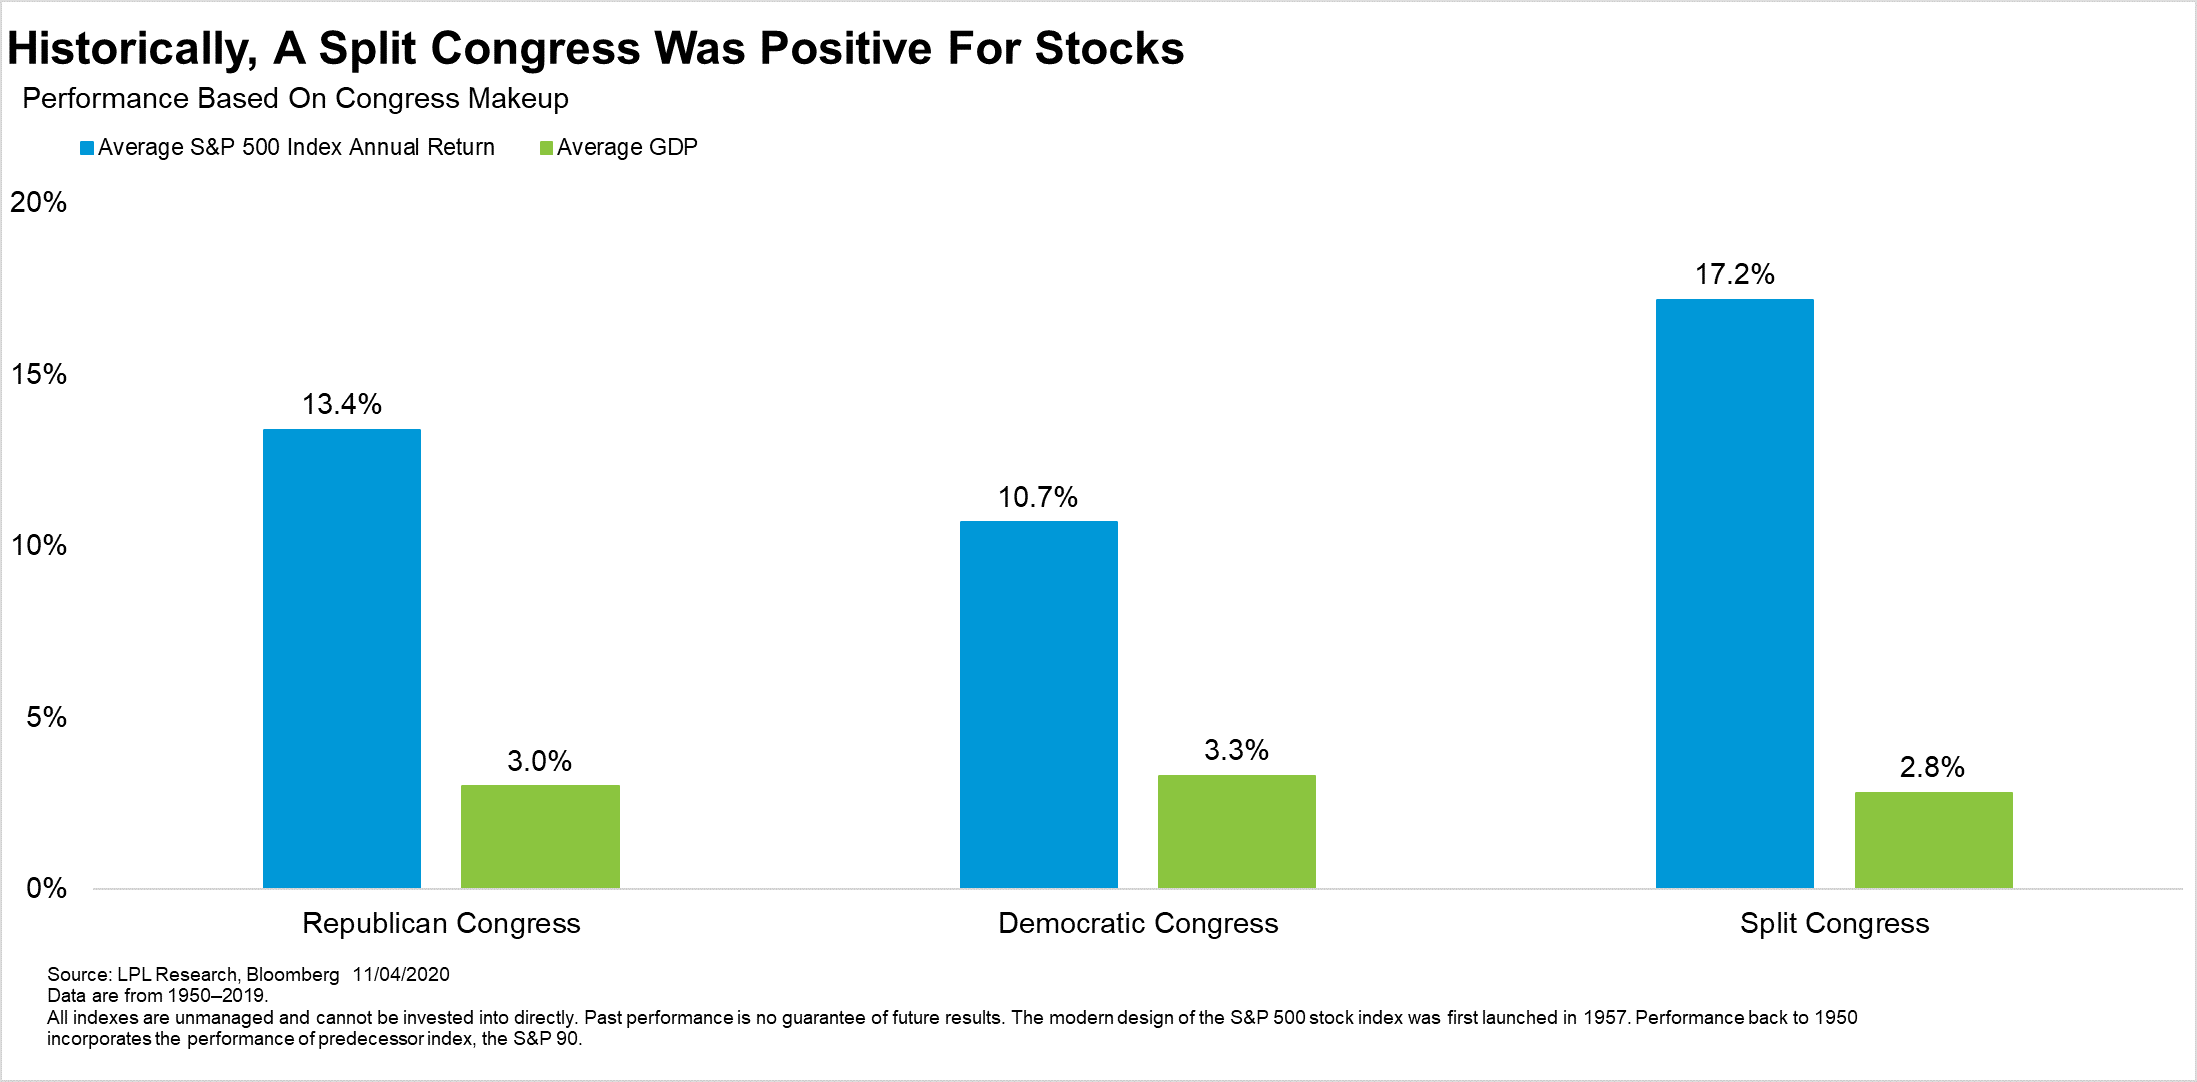 Historically A Split Congress Was Positive For Stocks